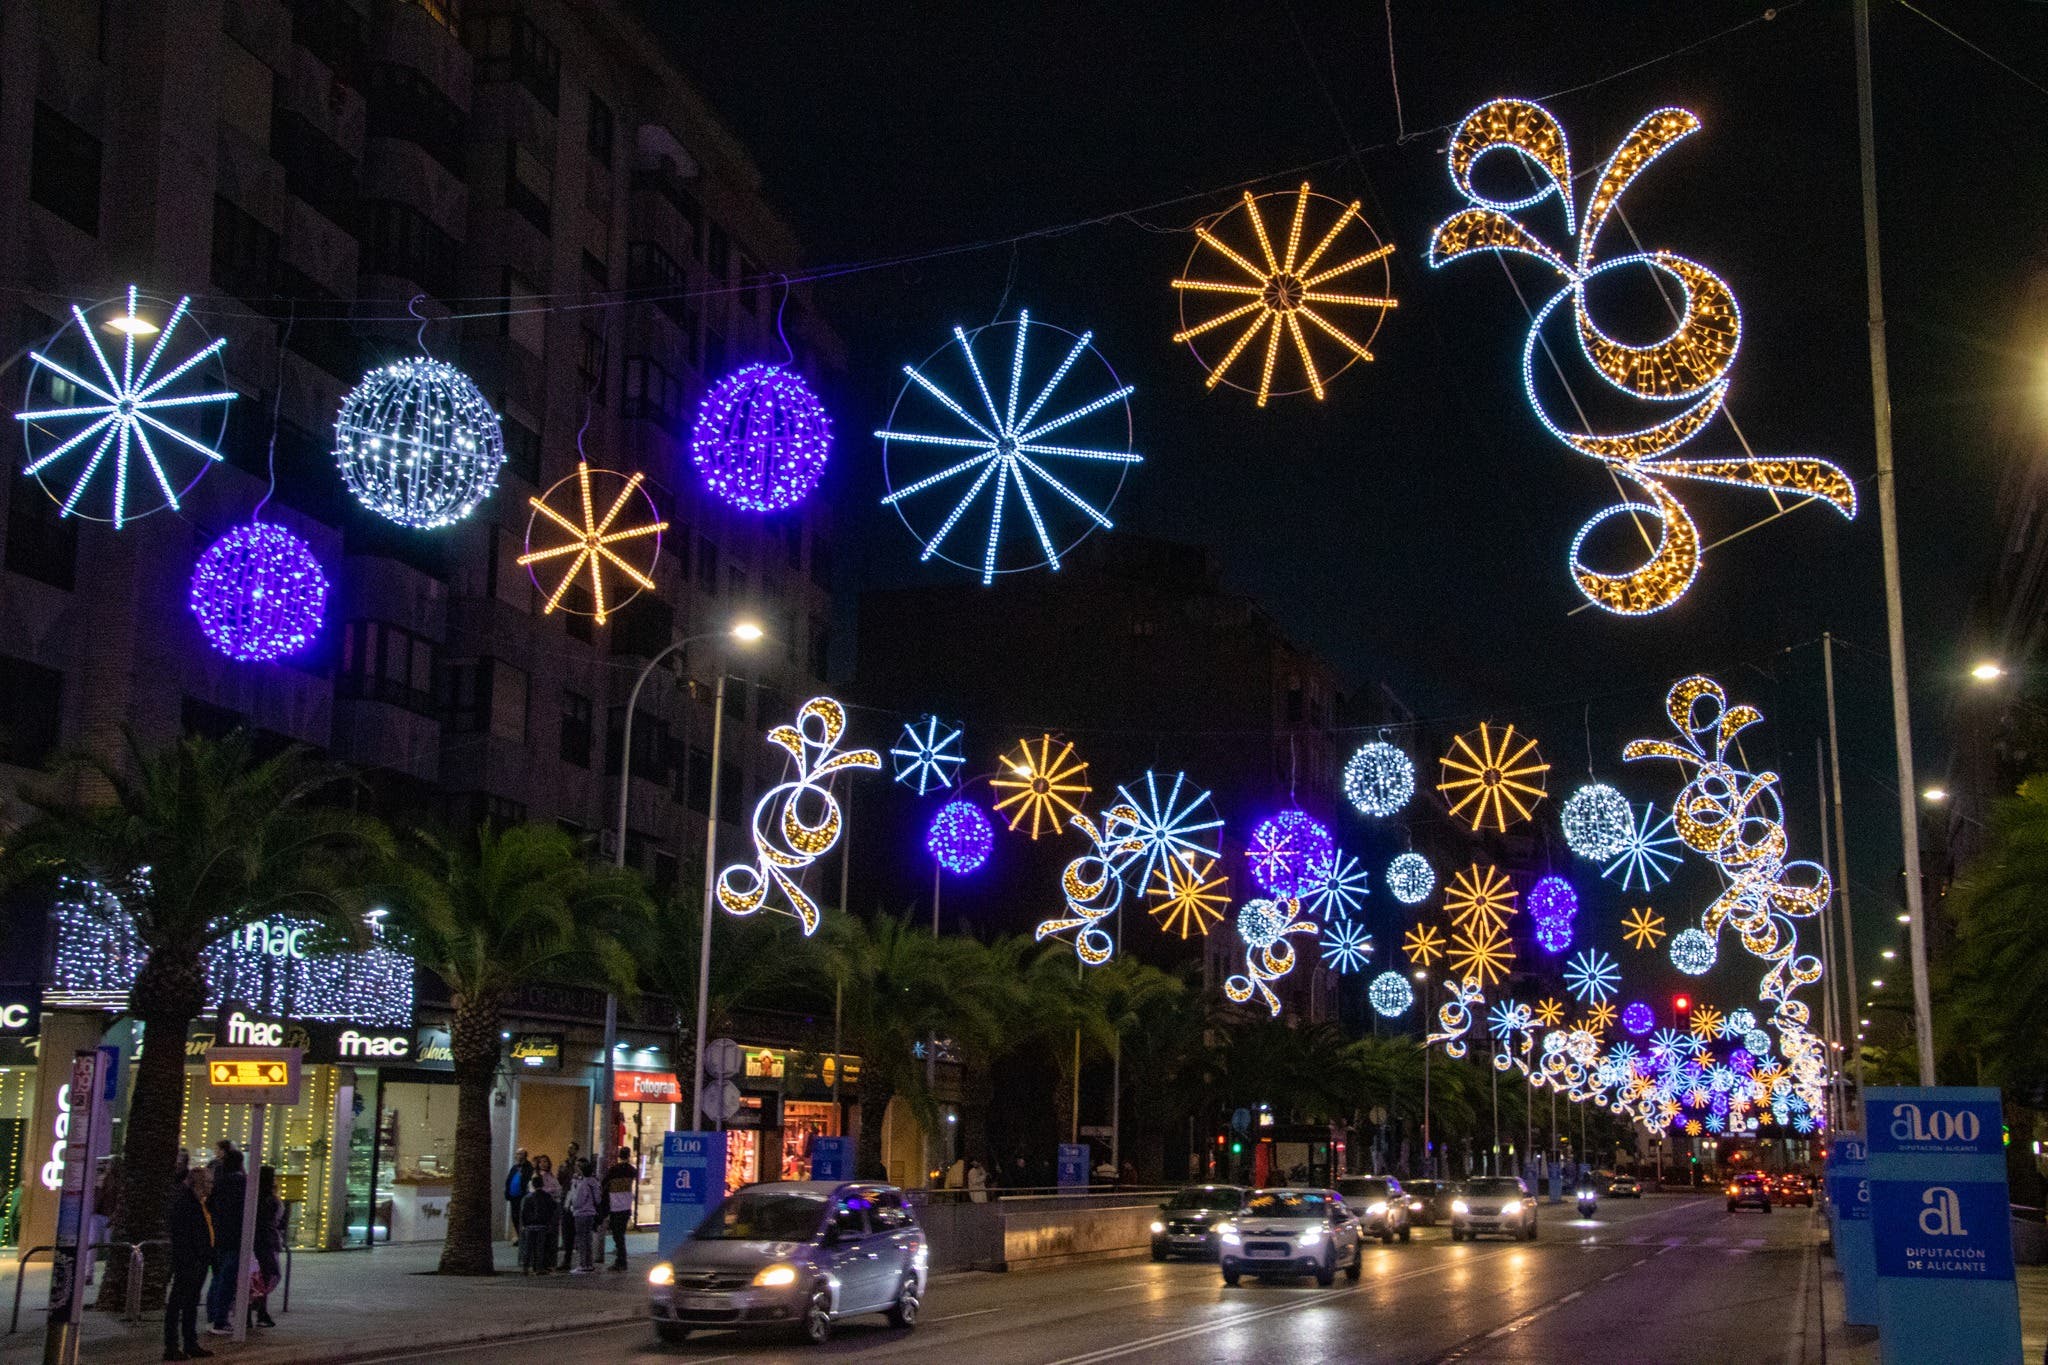 One Of Spains Biggest Christmas Light Displays Is Gearing Up For Big Friday Switch On.jpg